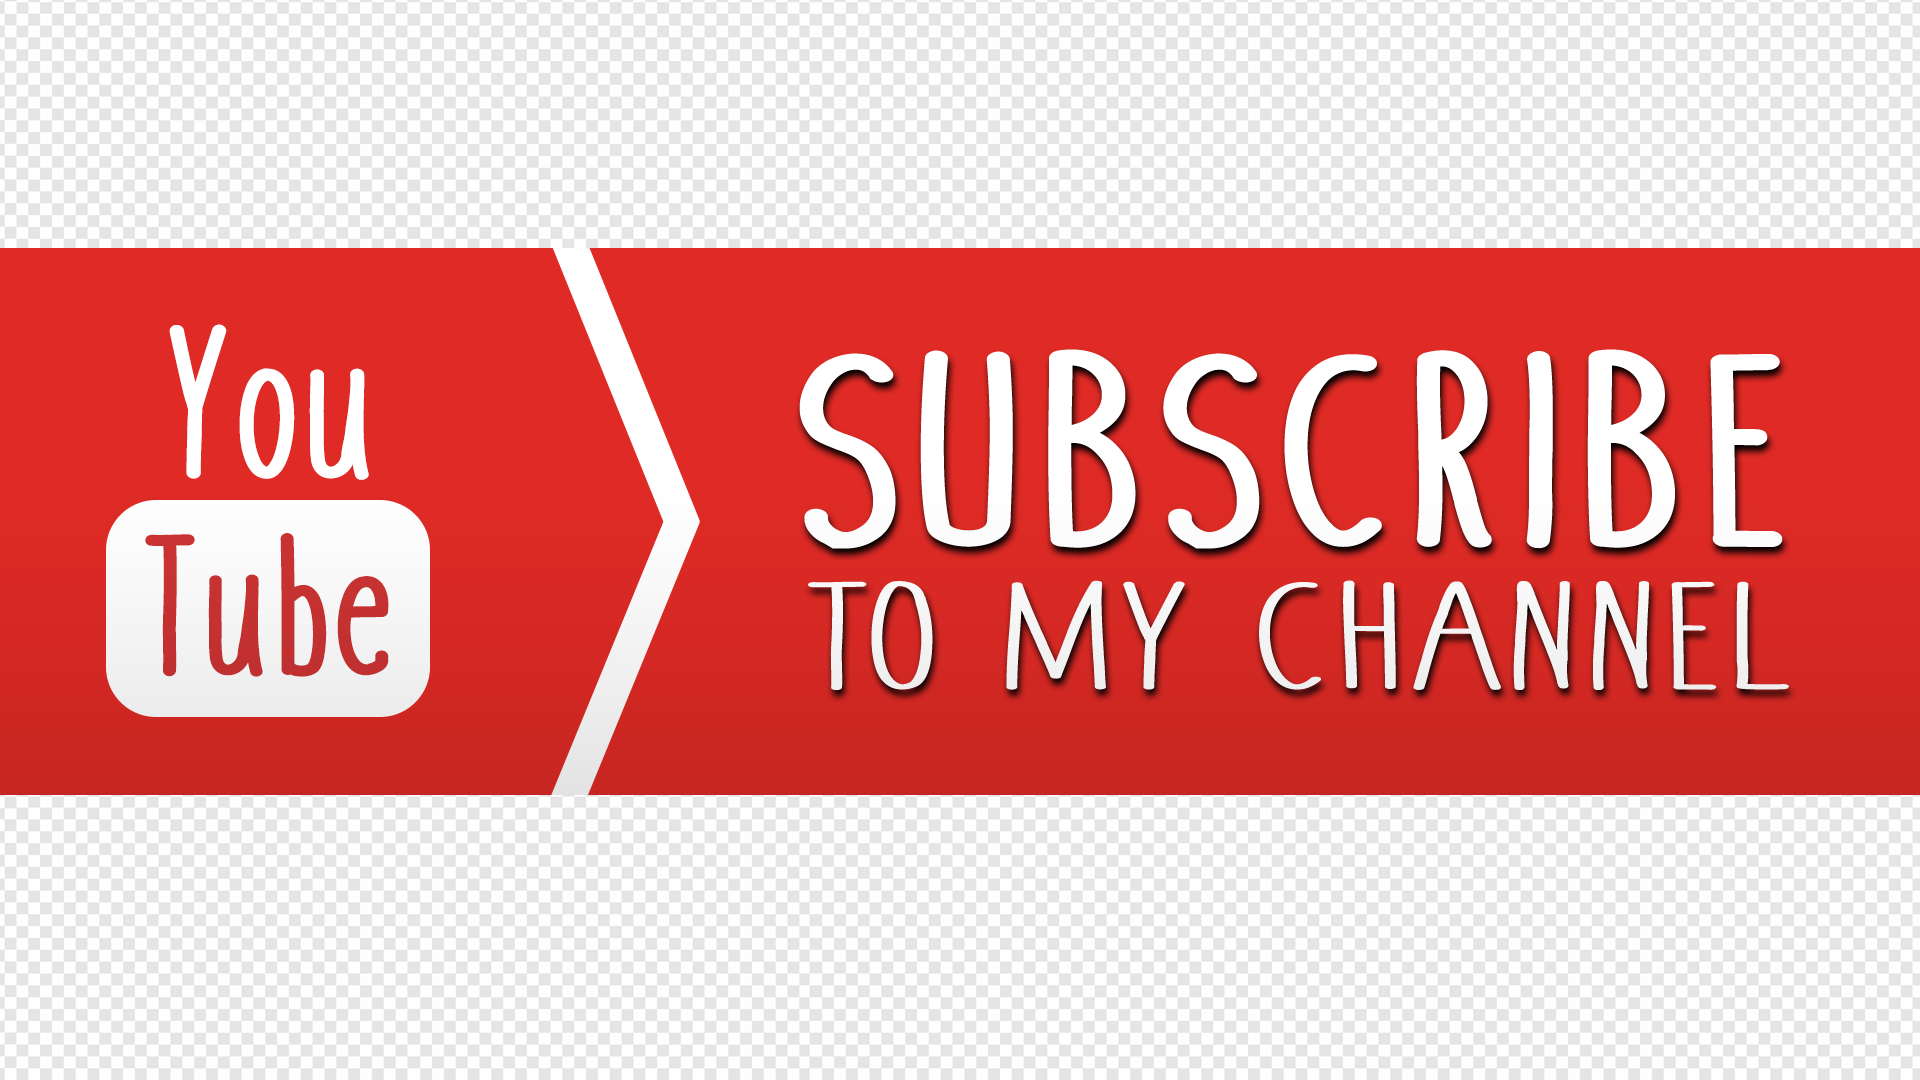 YouTube Subscribe PNG Transparent Images Download - PNG Packs